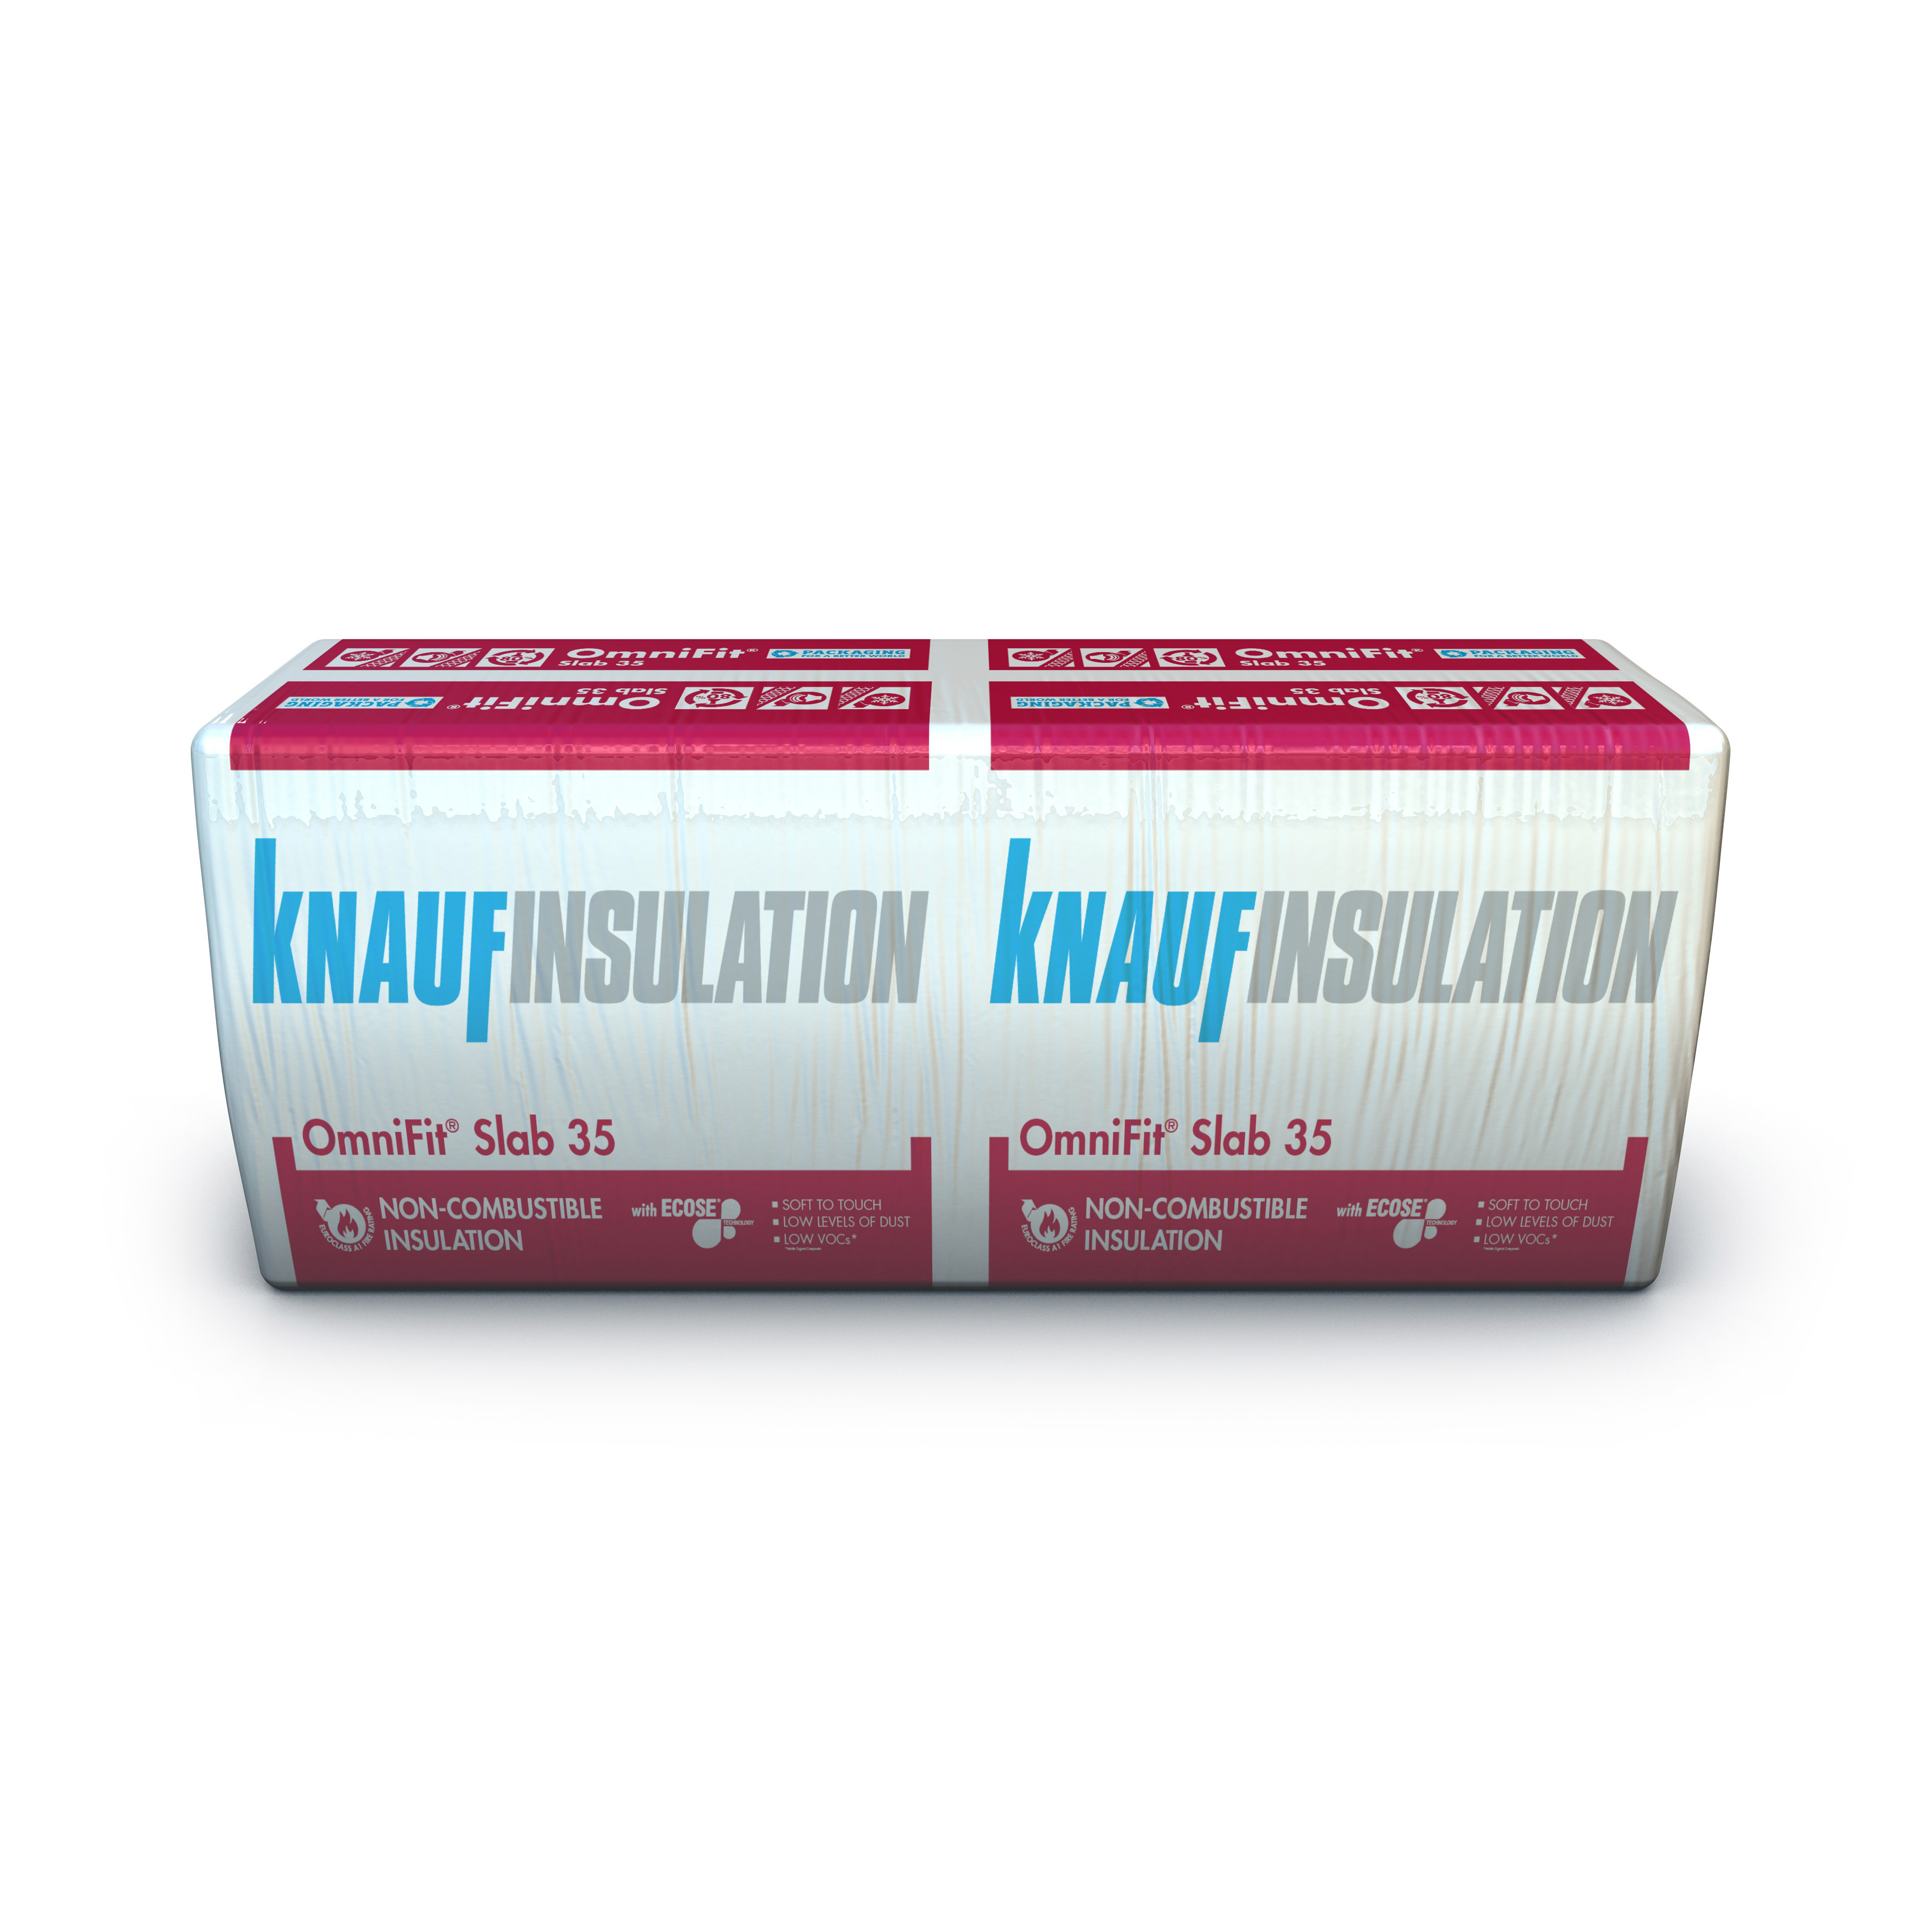 Knauf Insulation’s Support Makes The Grade